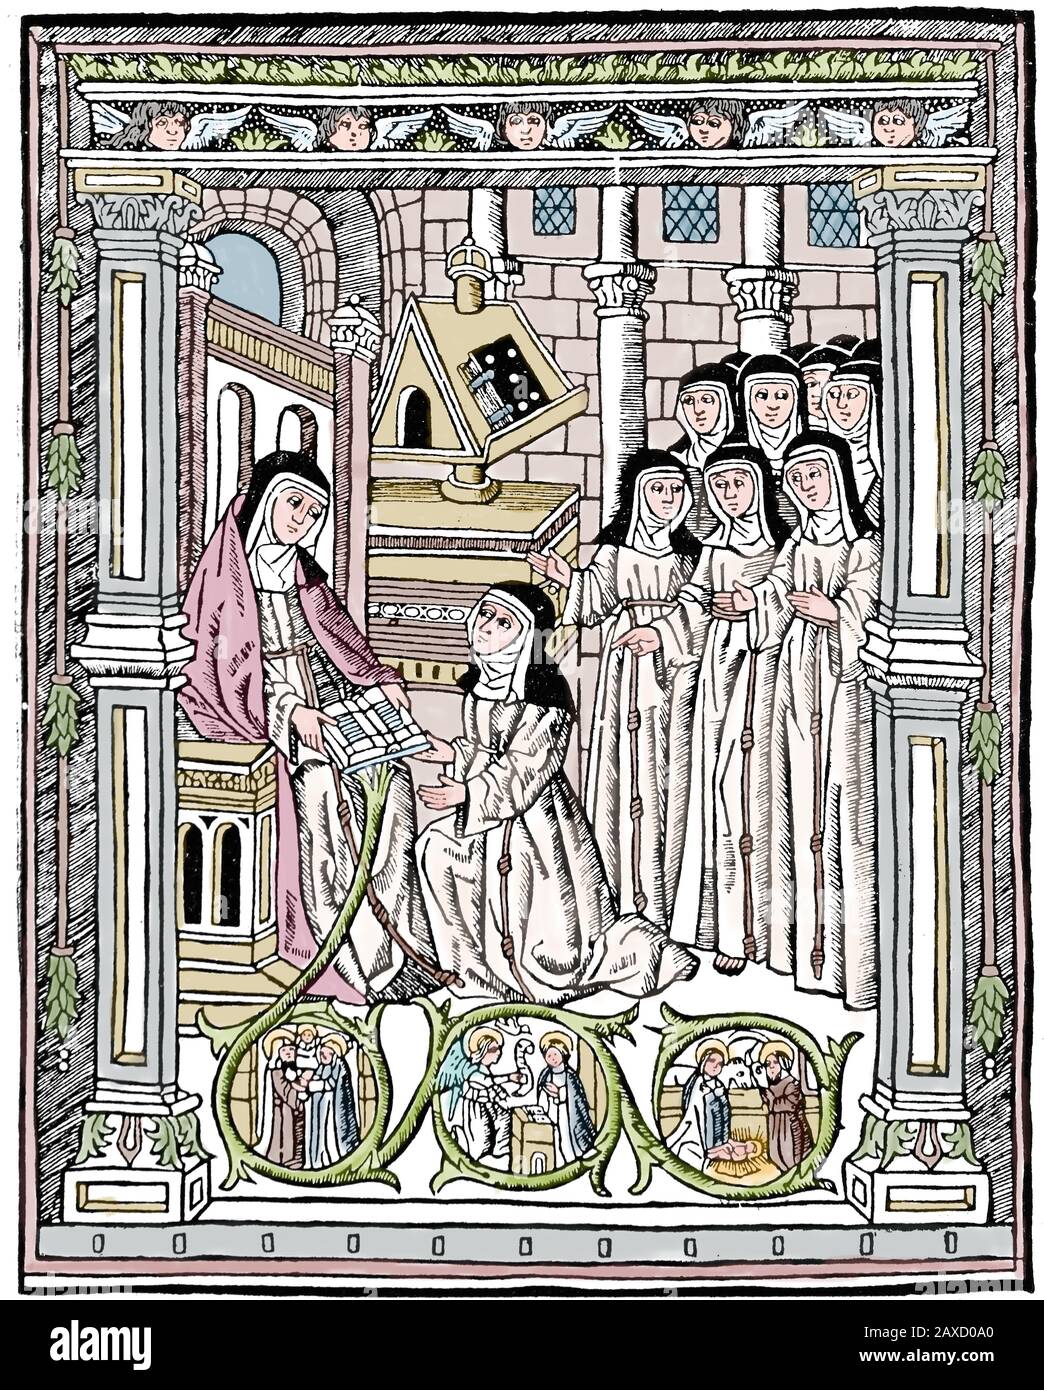 Abbess of Isabel de Villena (1430-1490) delivering her work  Vita Christi (Christ Life) to her Clarises nuns, Valencia, Spain. 1513 Stock Photo